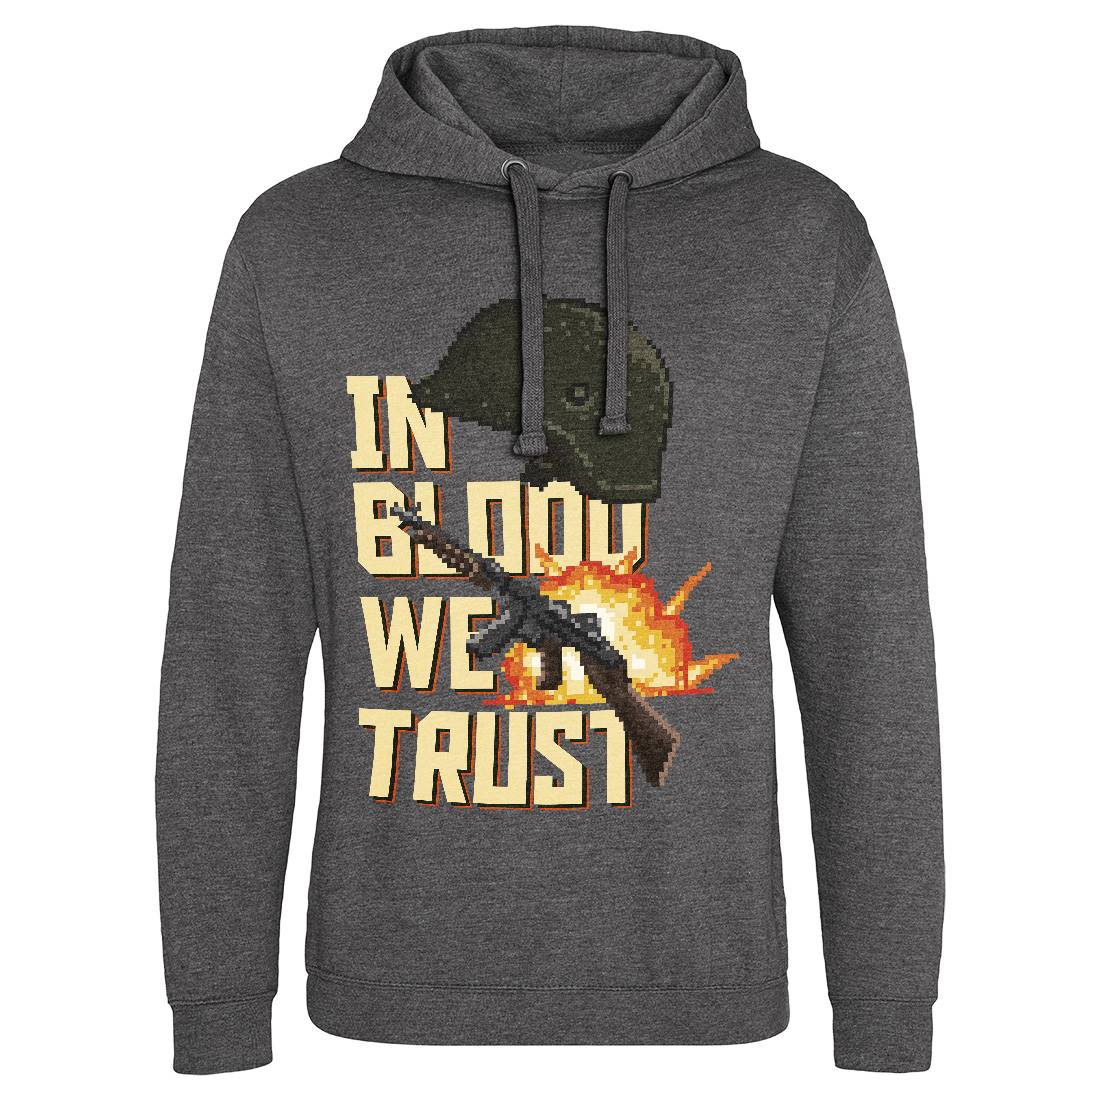 In Blood We Trust Mens Hoodie Without Pocket Army B918